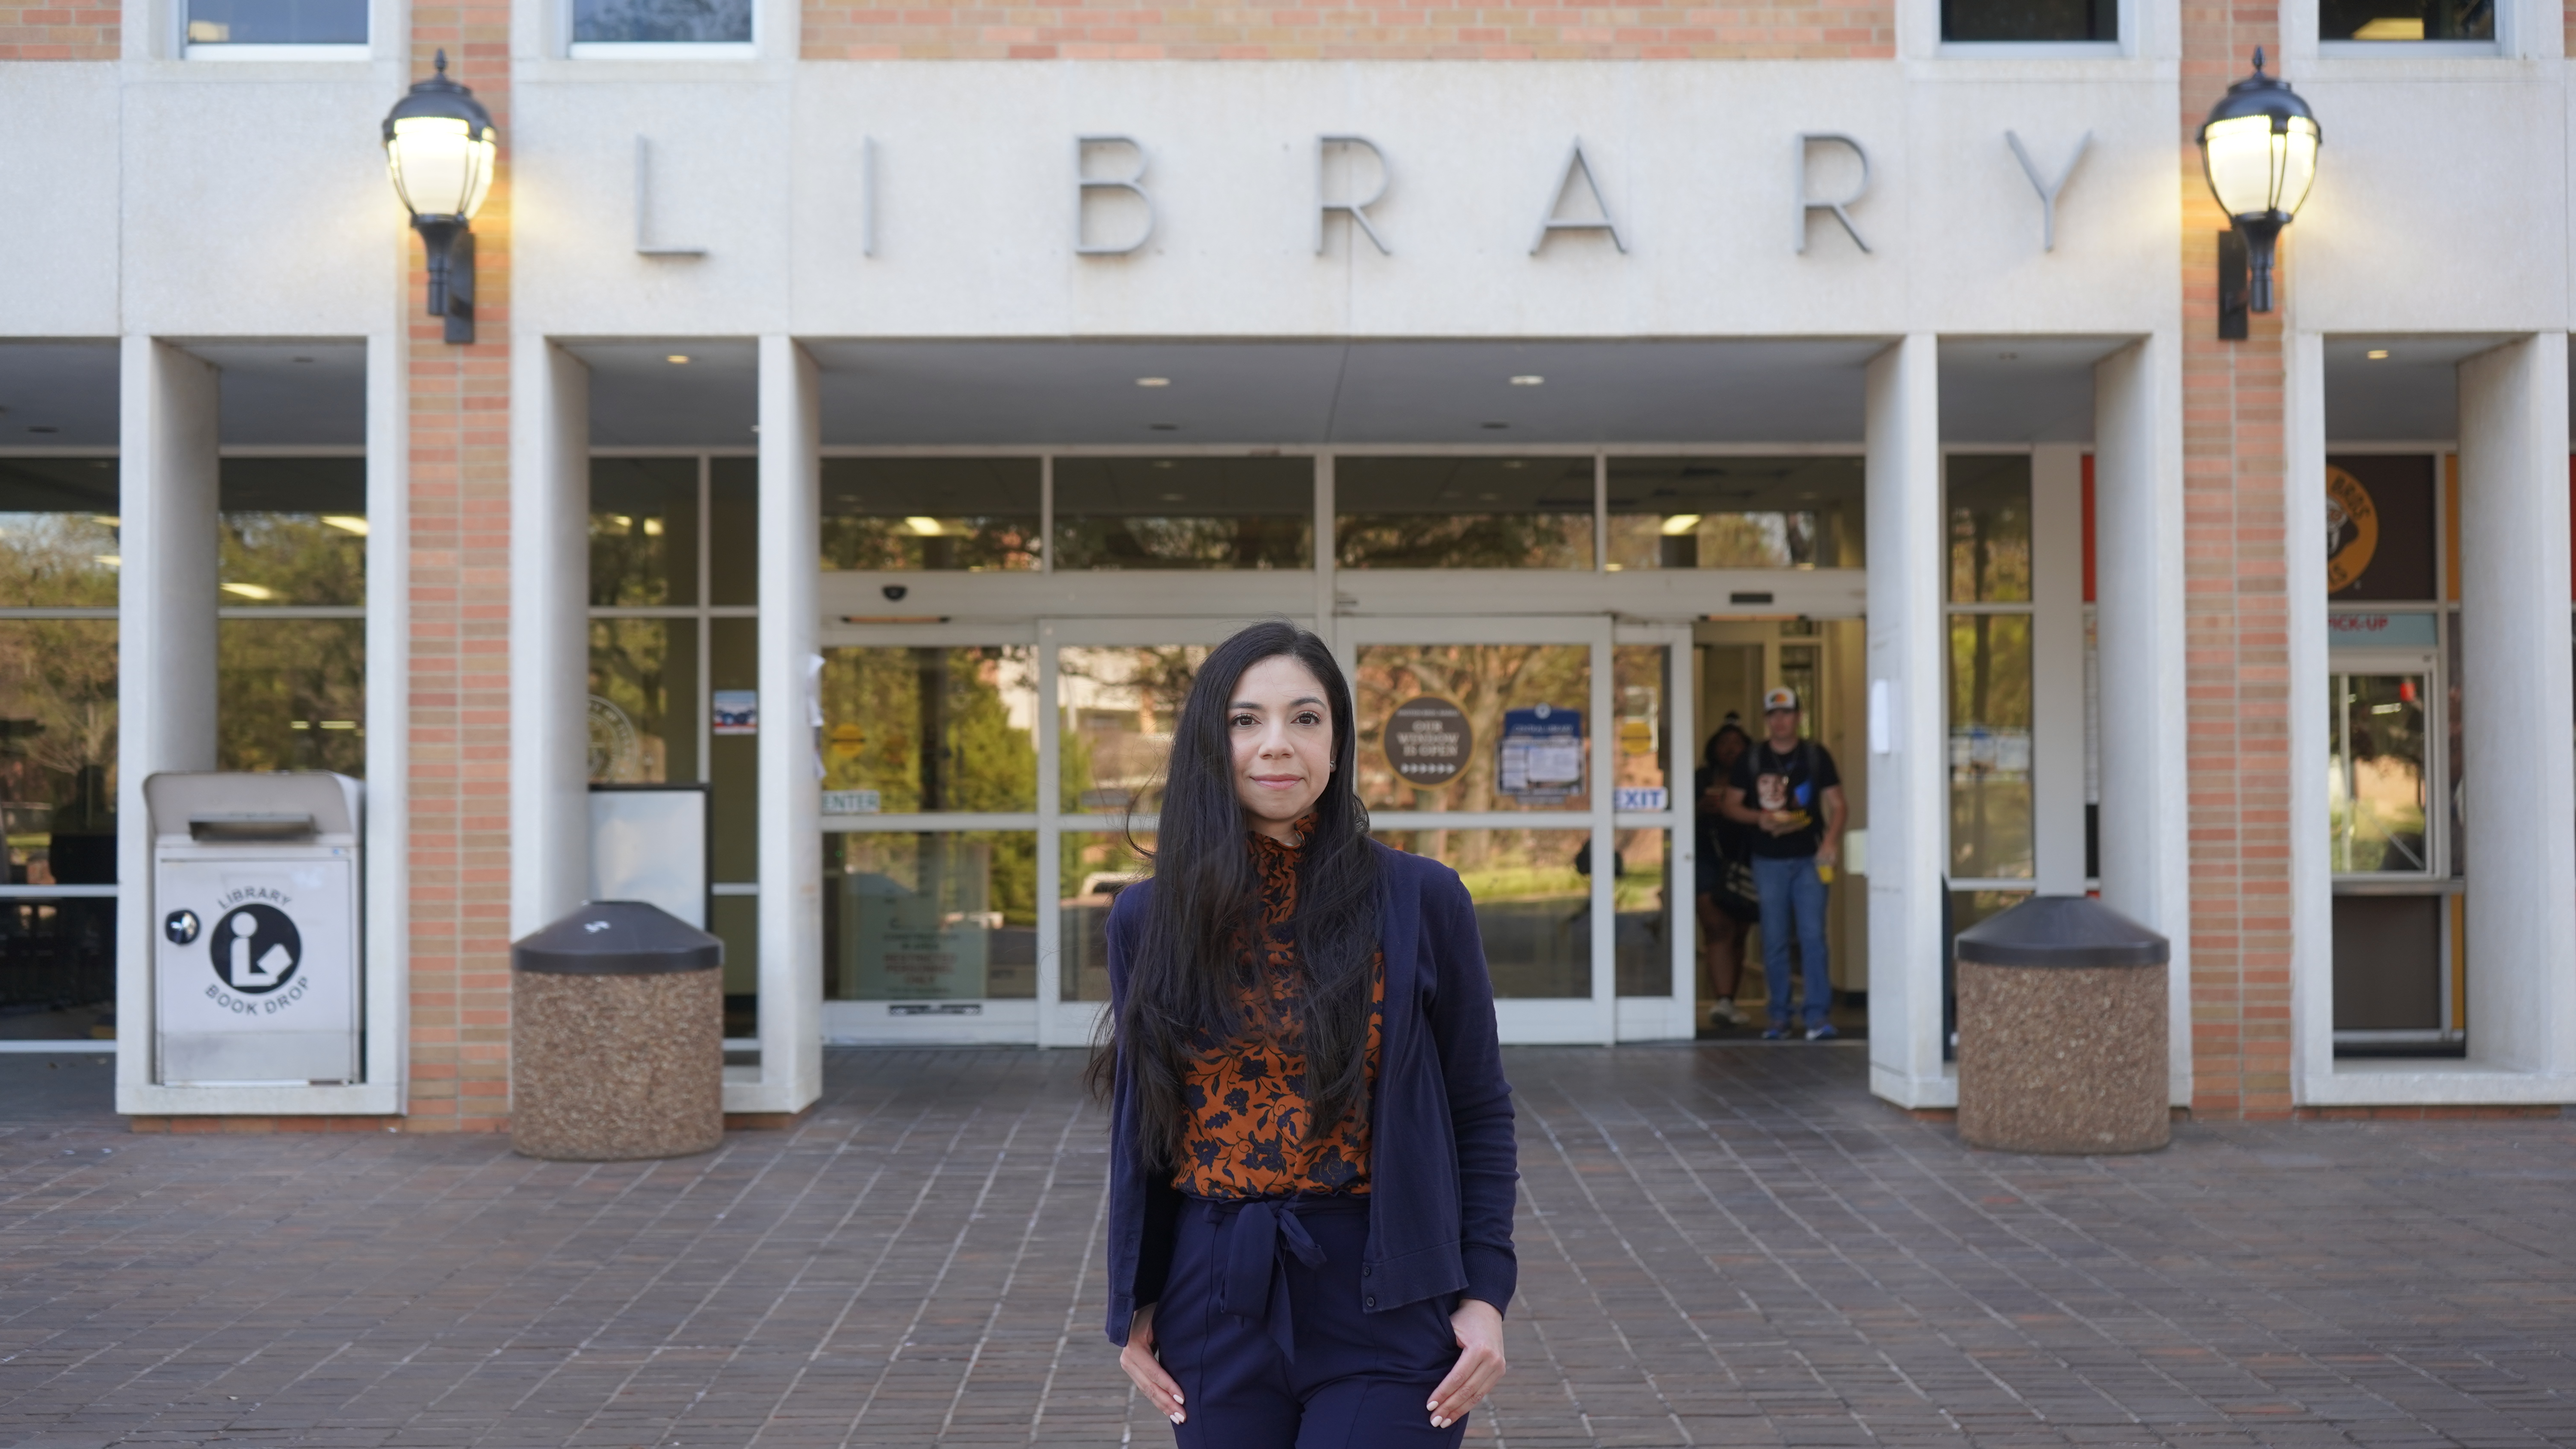 A young woman with long dark hair stands in front of Central Library in a blue tailored suit with an orange patterned top underneath. The word "library" is displayed on the building behind her.